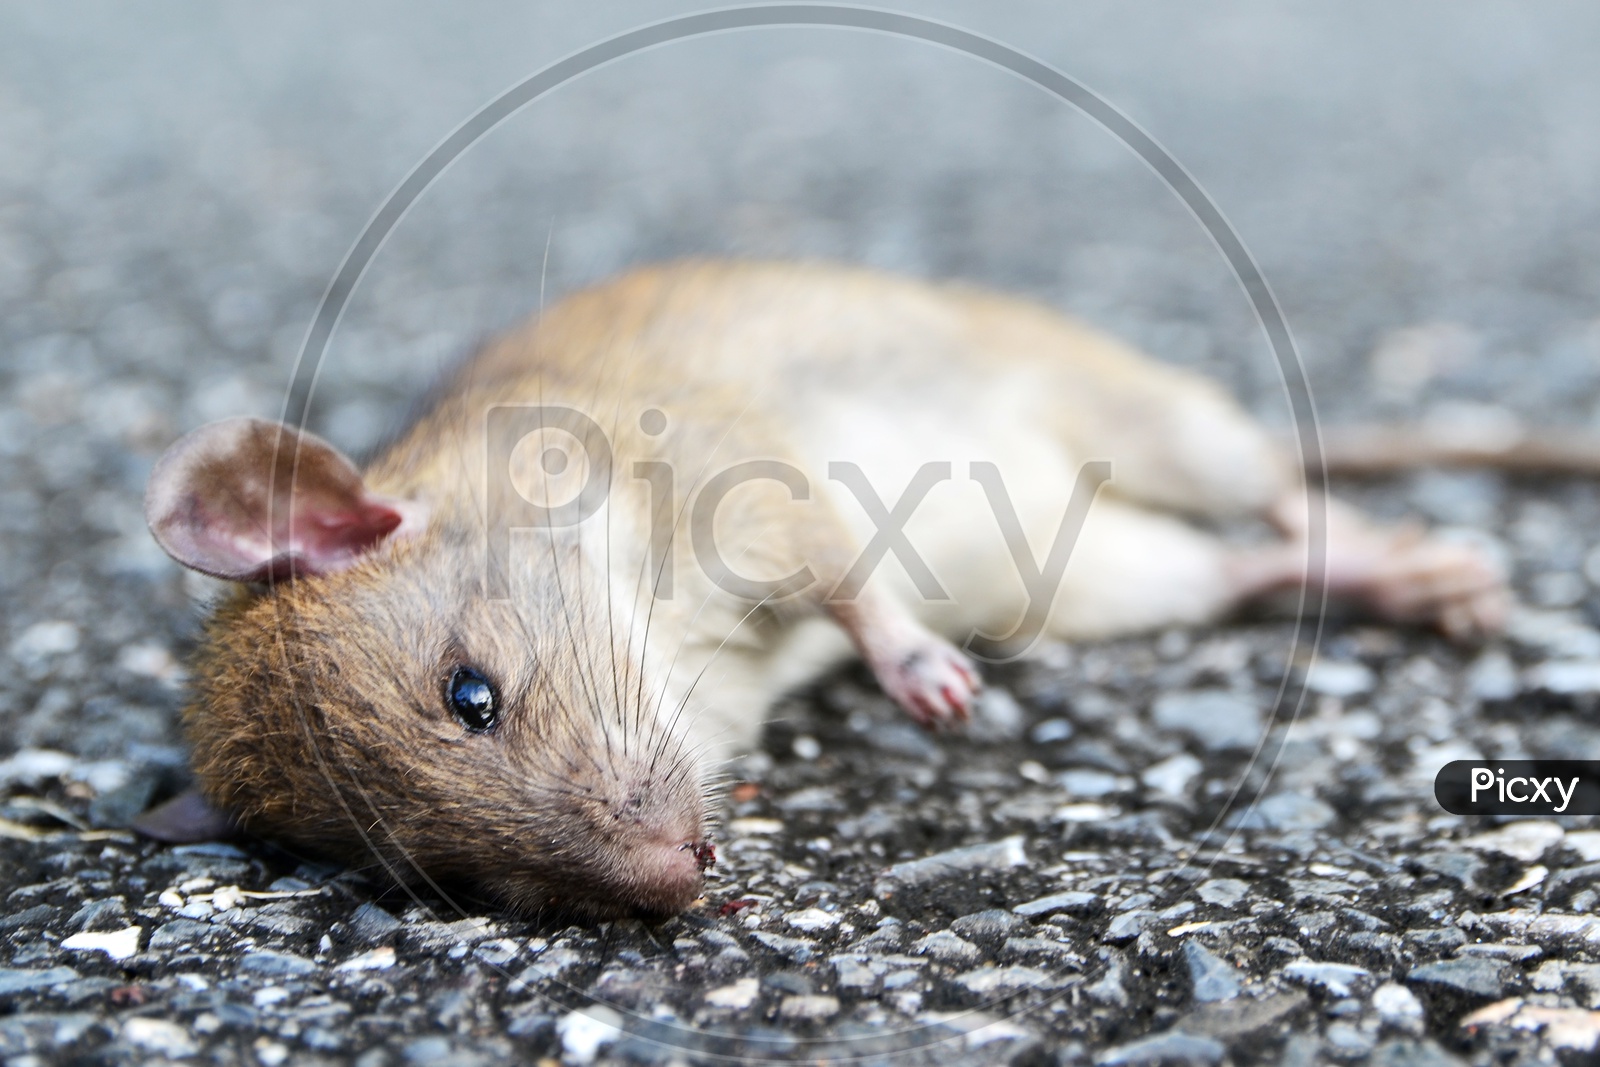 A Dead Mouse on the Thailand road